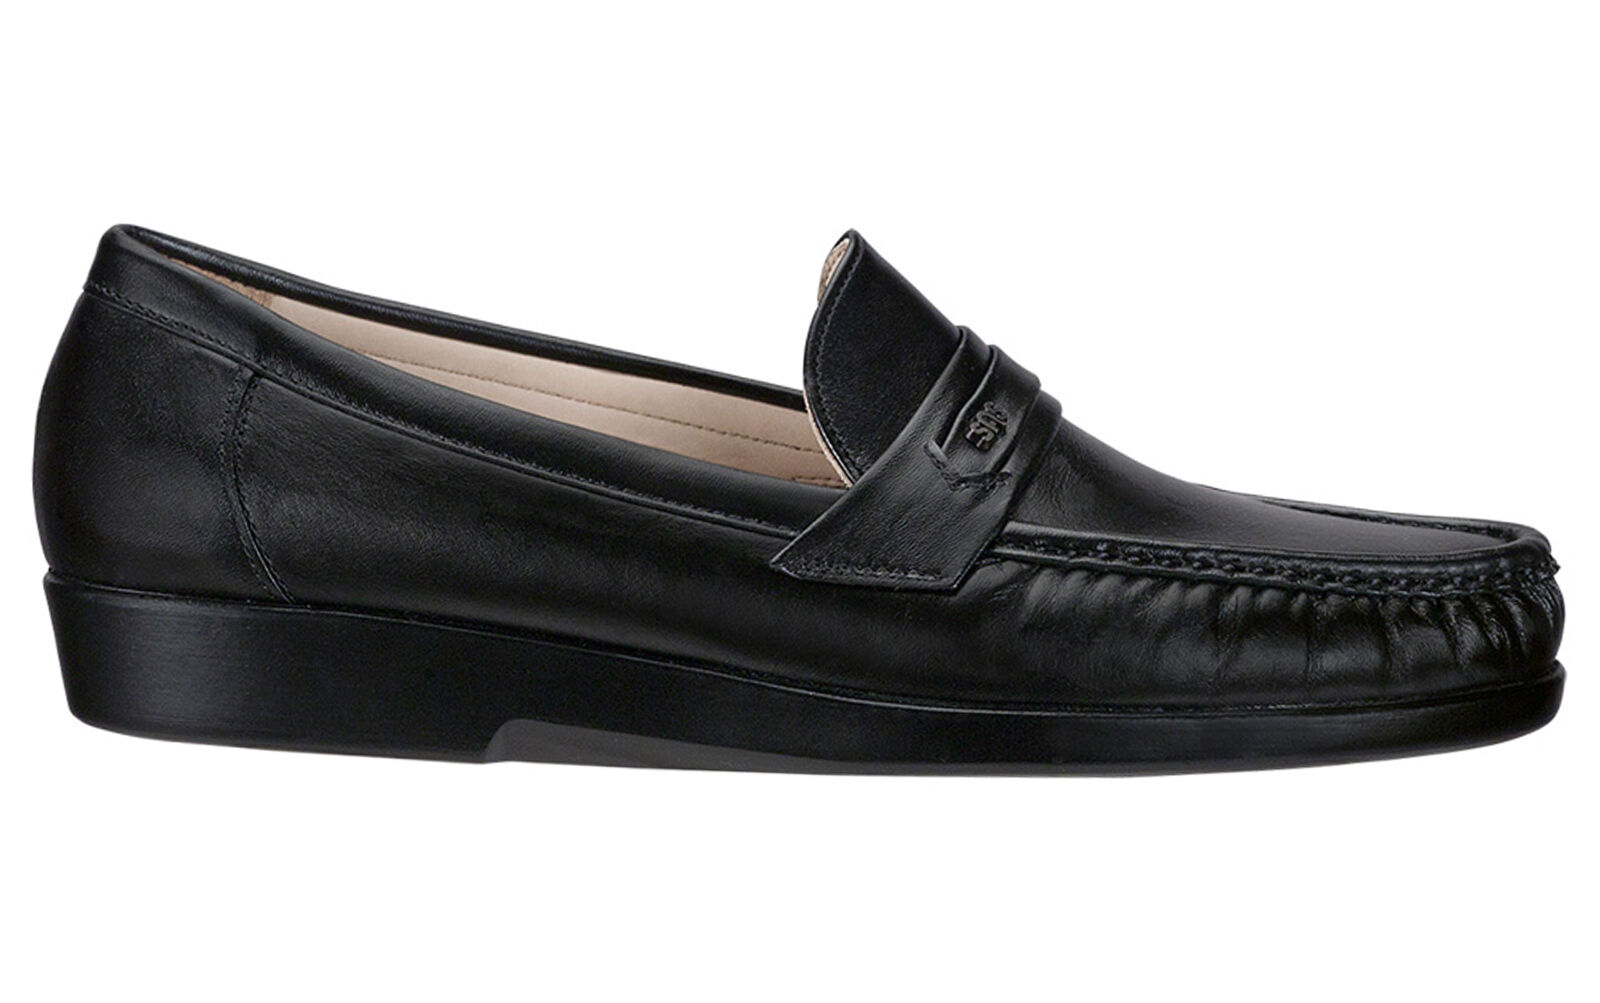 Men's Loafers find Ace